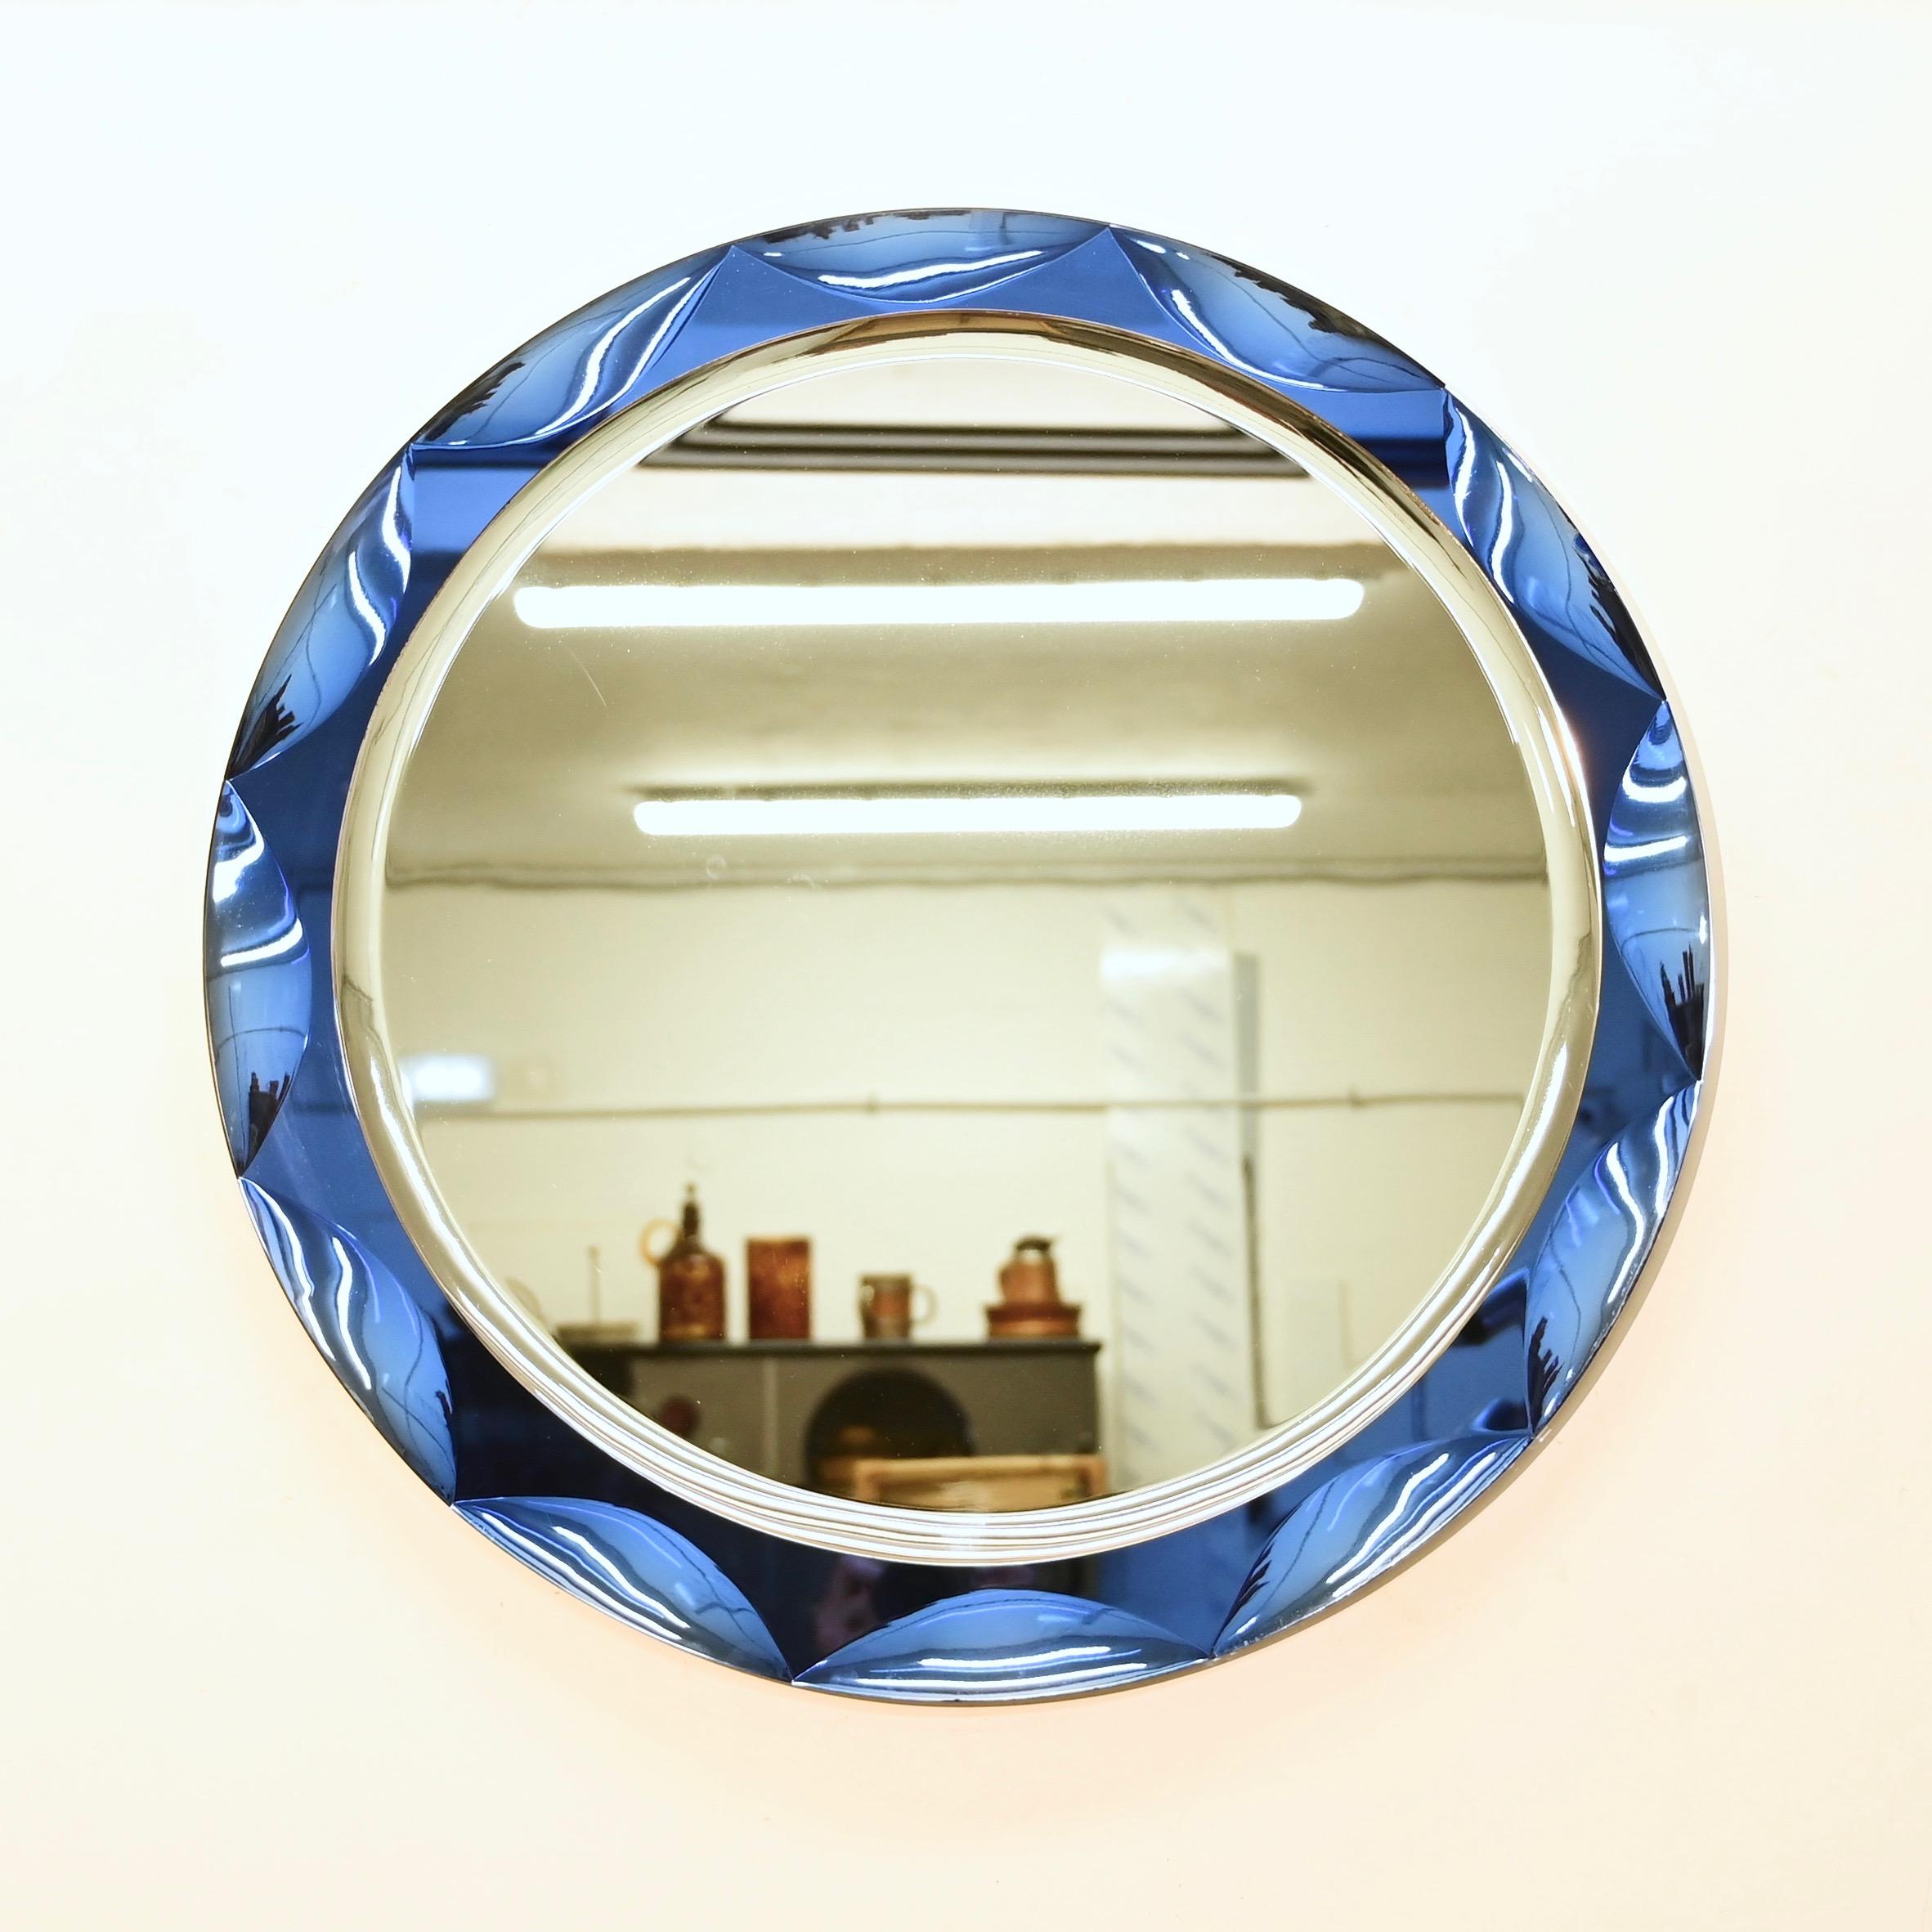 Midcentury Round Blue Diamond Double Beveled Mirror by Galvorame, Italy 1970s For Sale 7